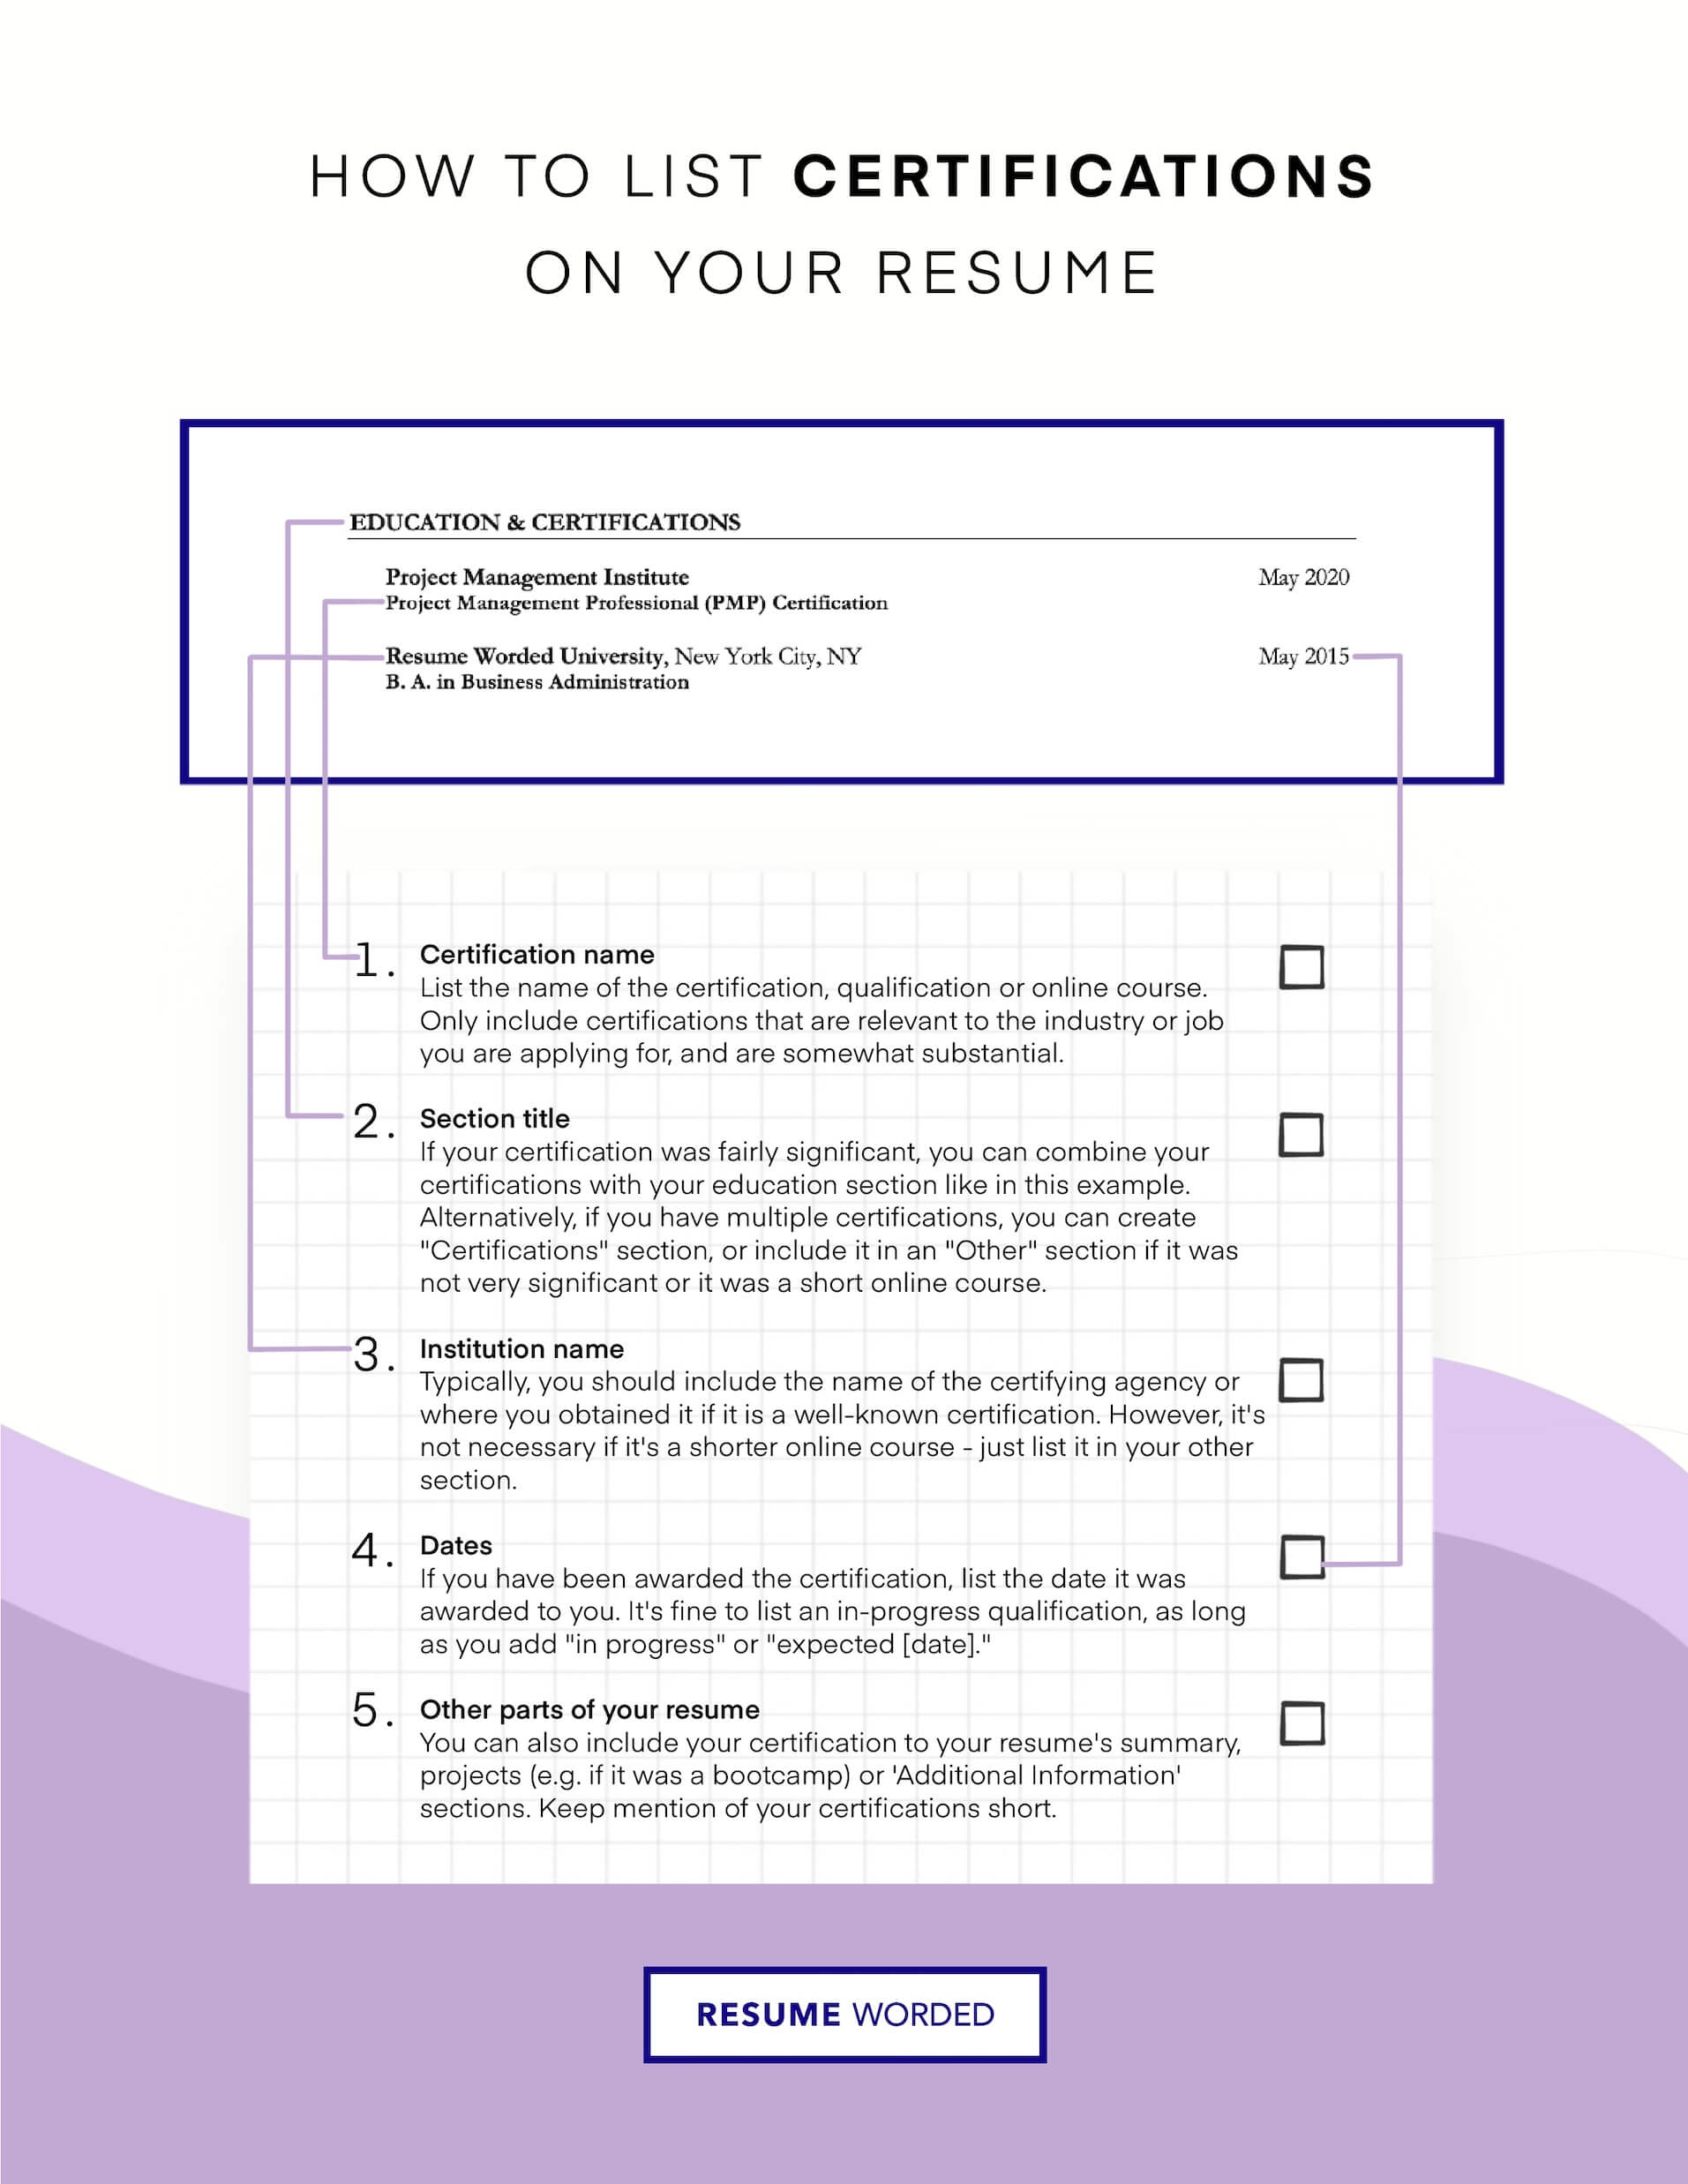 Include any technical writing certification. - Technical Writer Resume